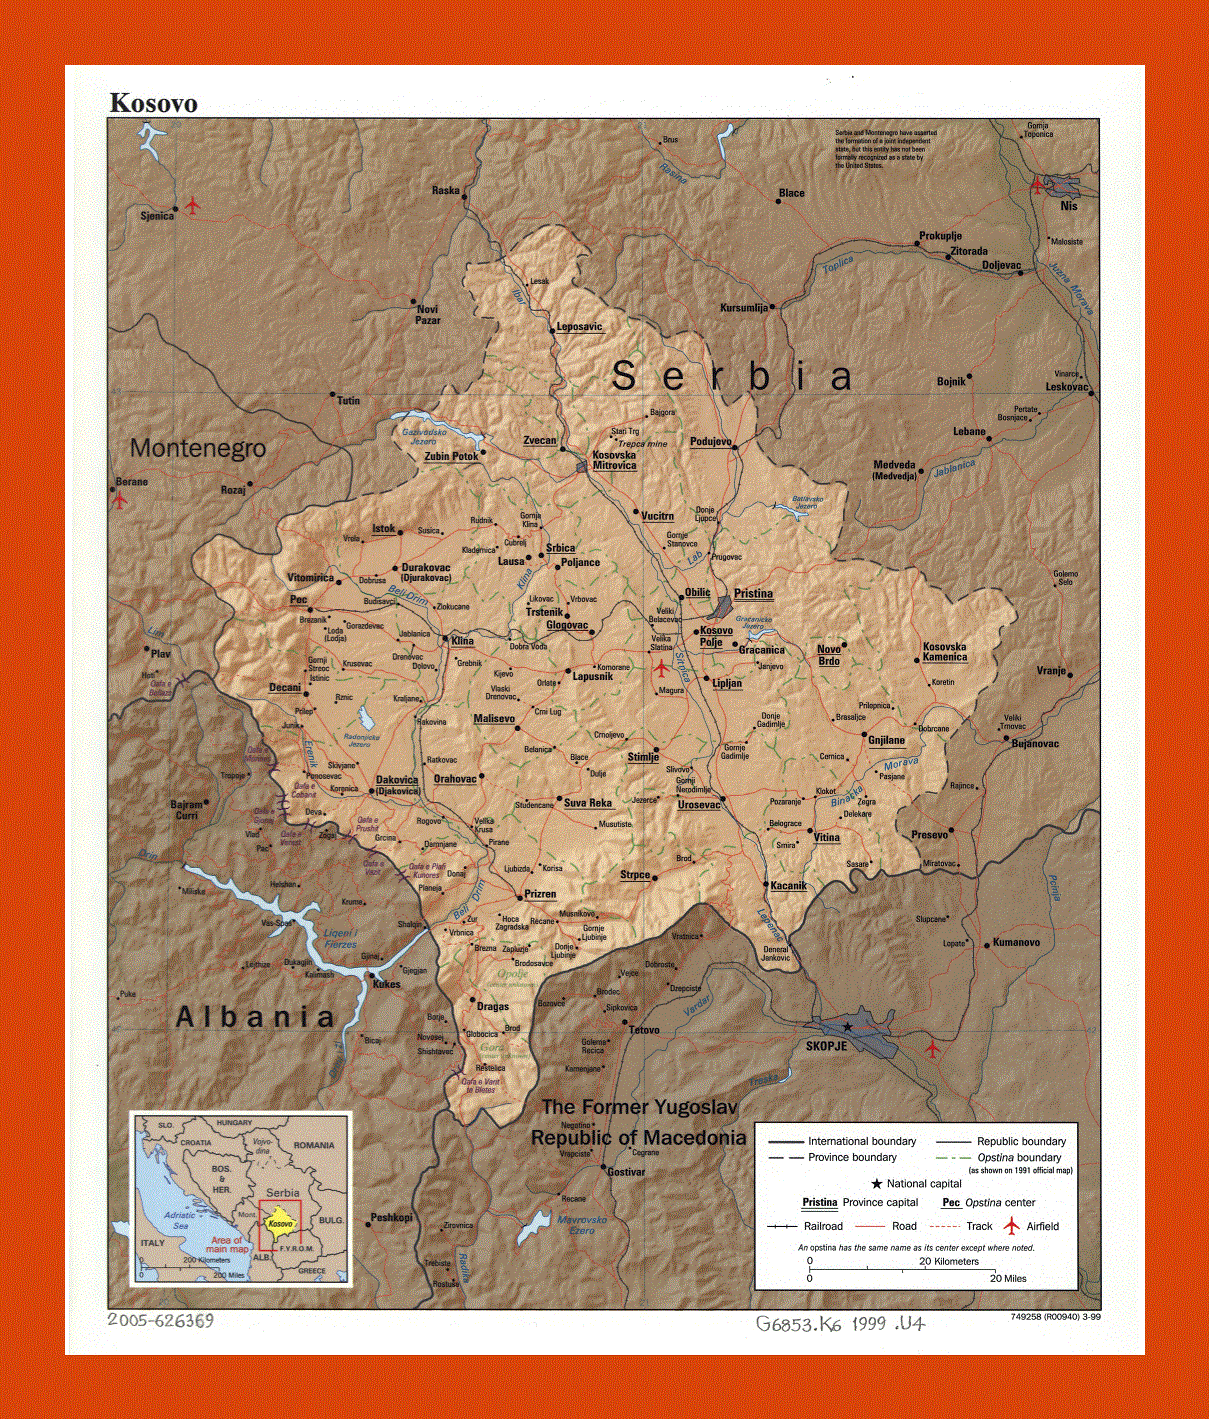 Political and administrative map of Kosovo - 1999